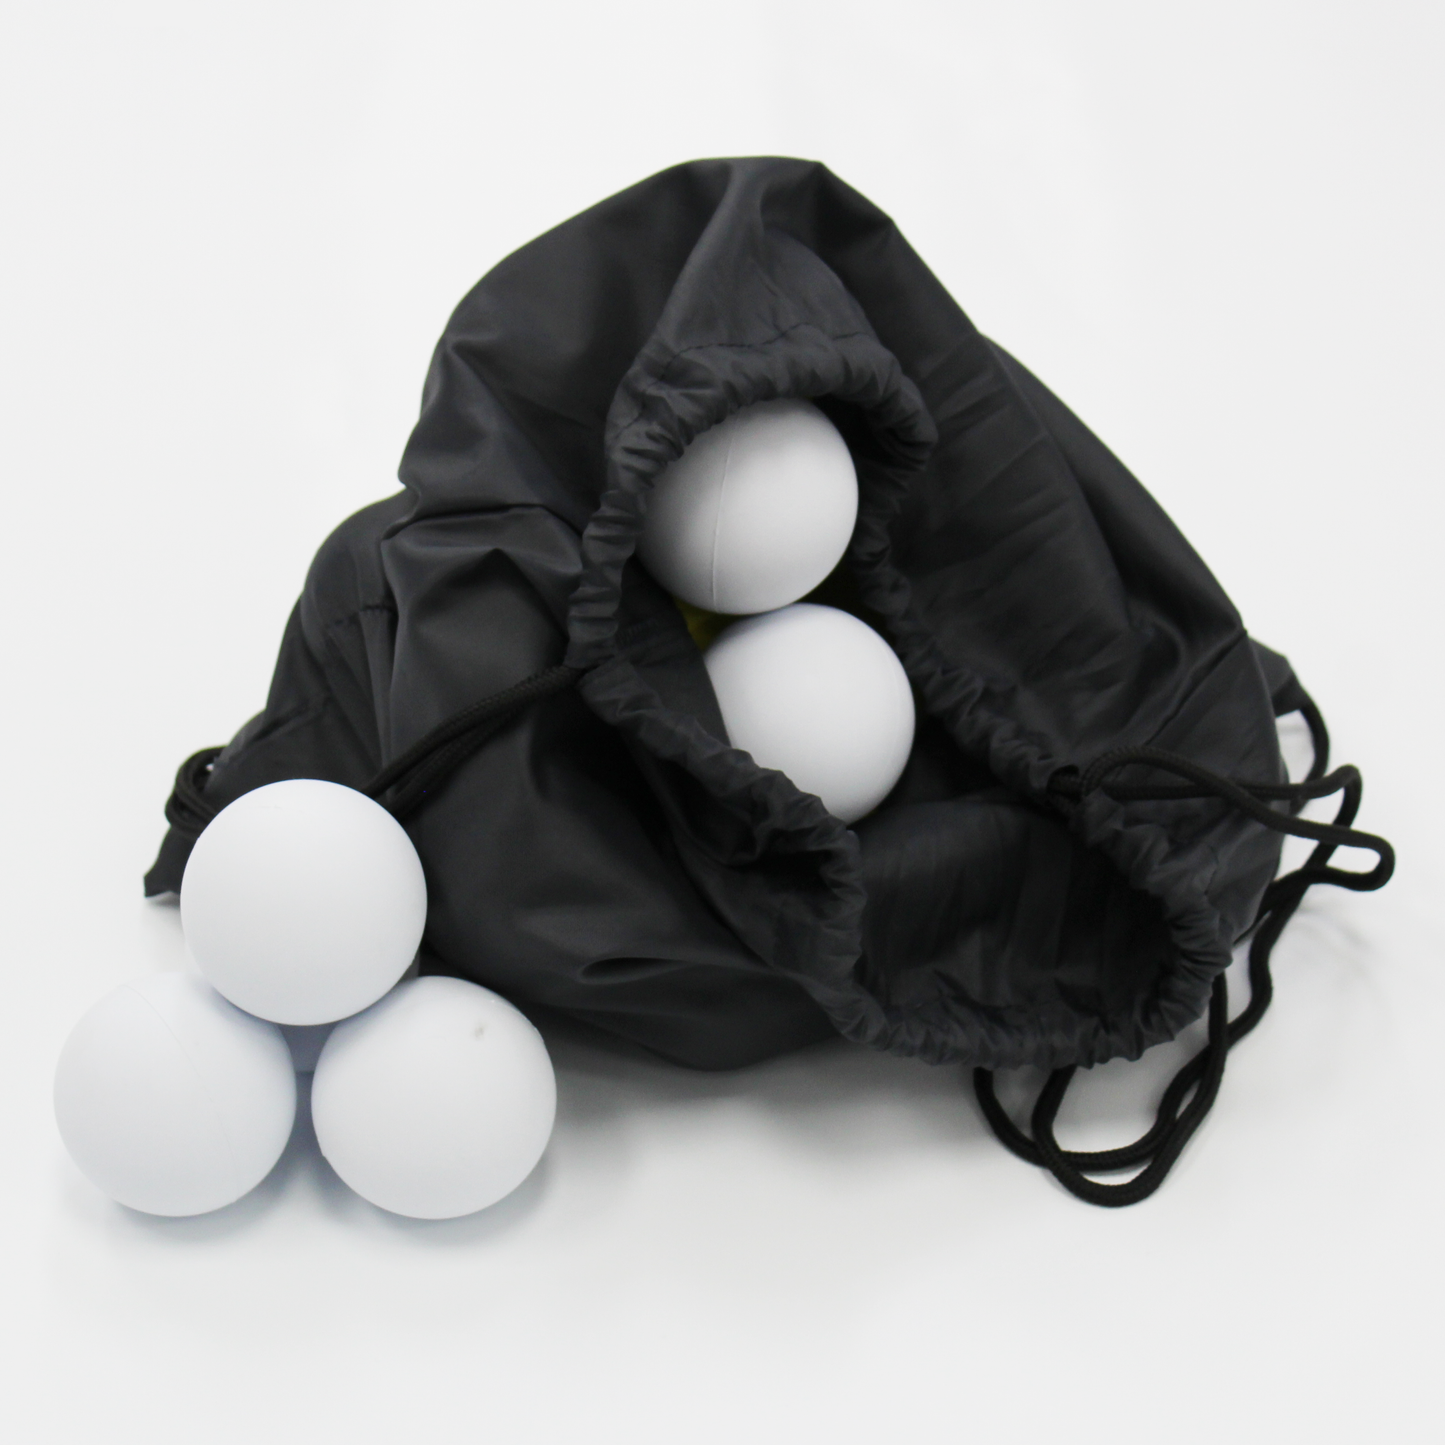 24 Pack of Lacrosse Balls w/ Blatant Cinch Pack